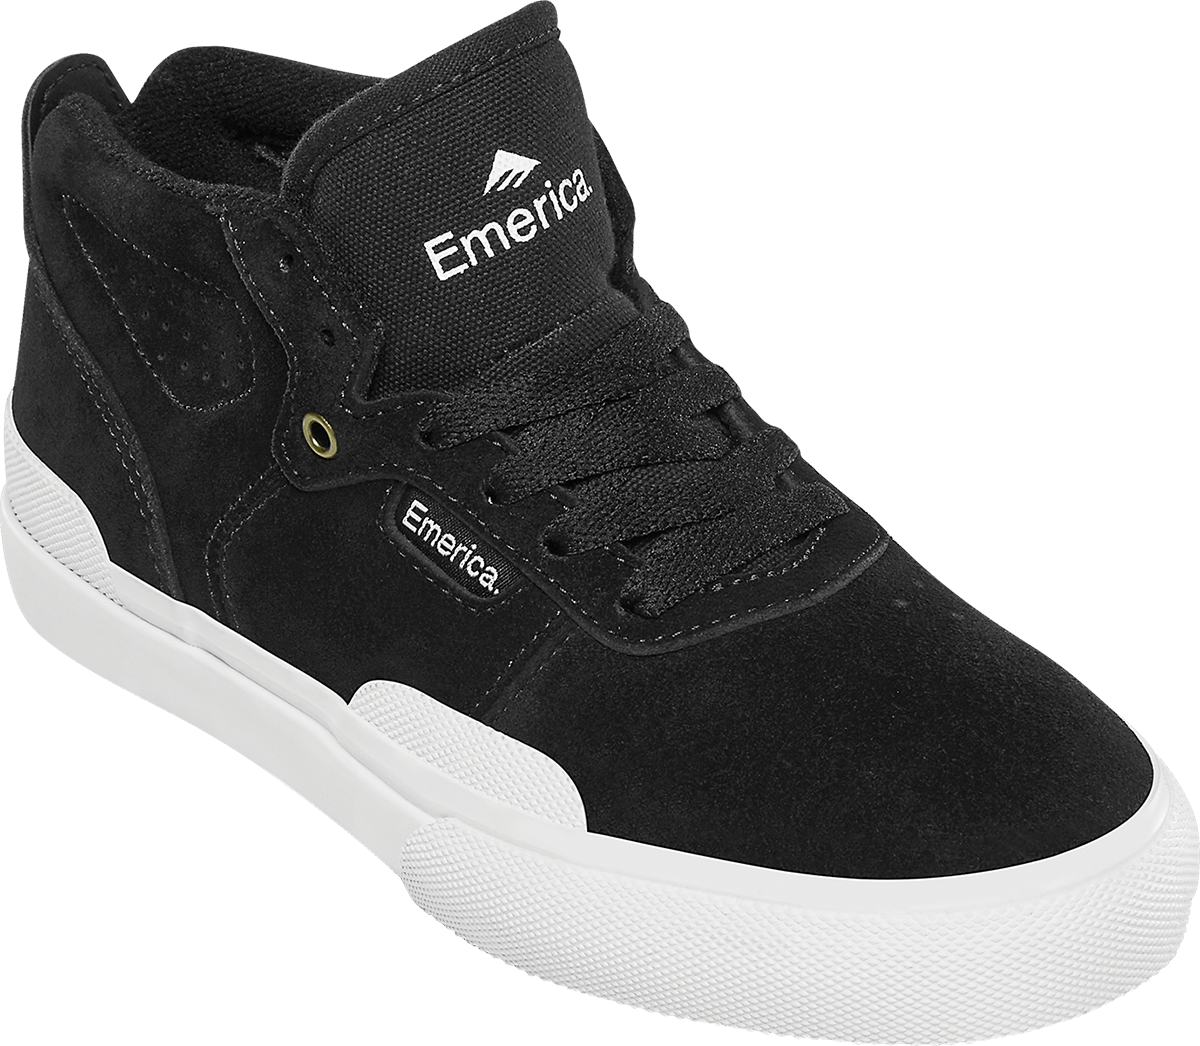 EMERICA Pillar Shoes Youth Black/White/Gold Youth and Toddler Skate Shoes Emerica 1 